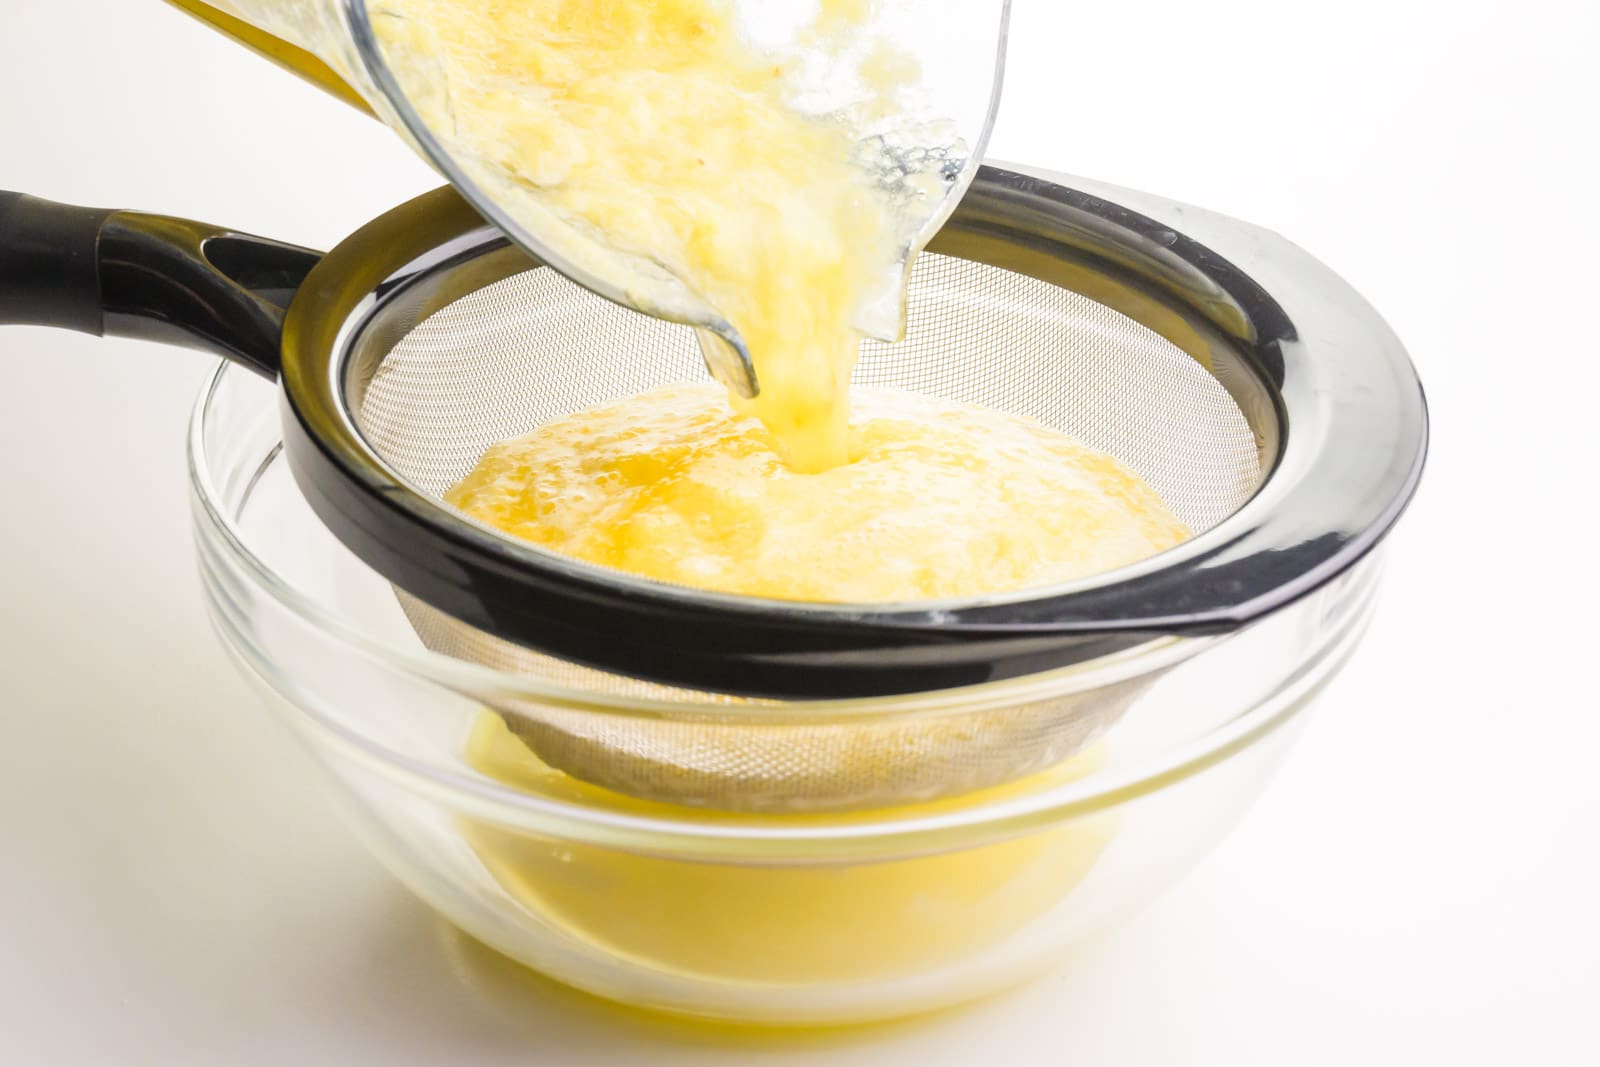 A pineapple slush mixture is being poured into a fine mesh strainer over a bowl, resulting in pineapple juice in the bowl.